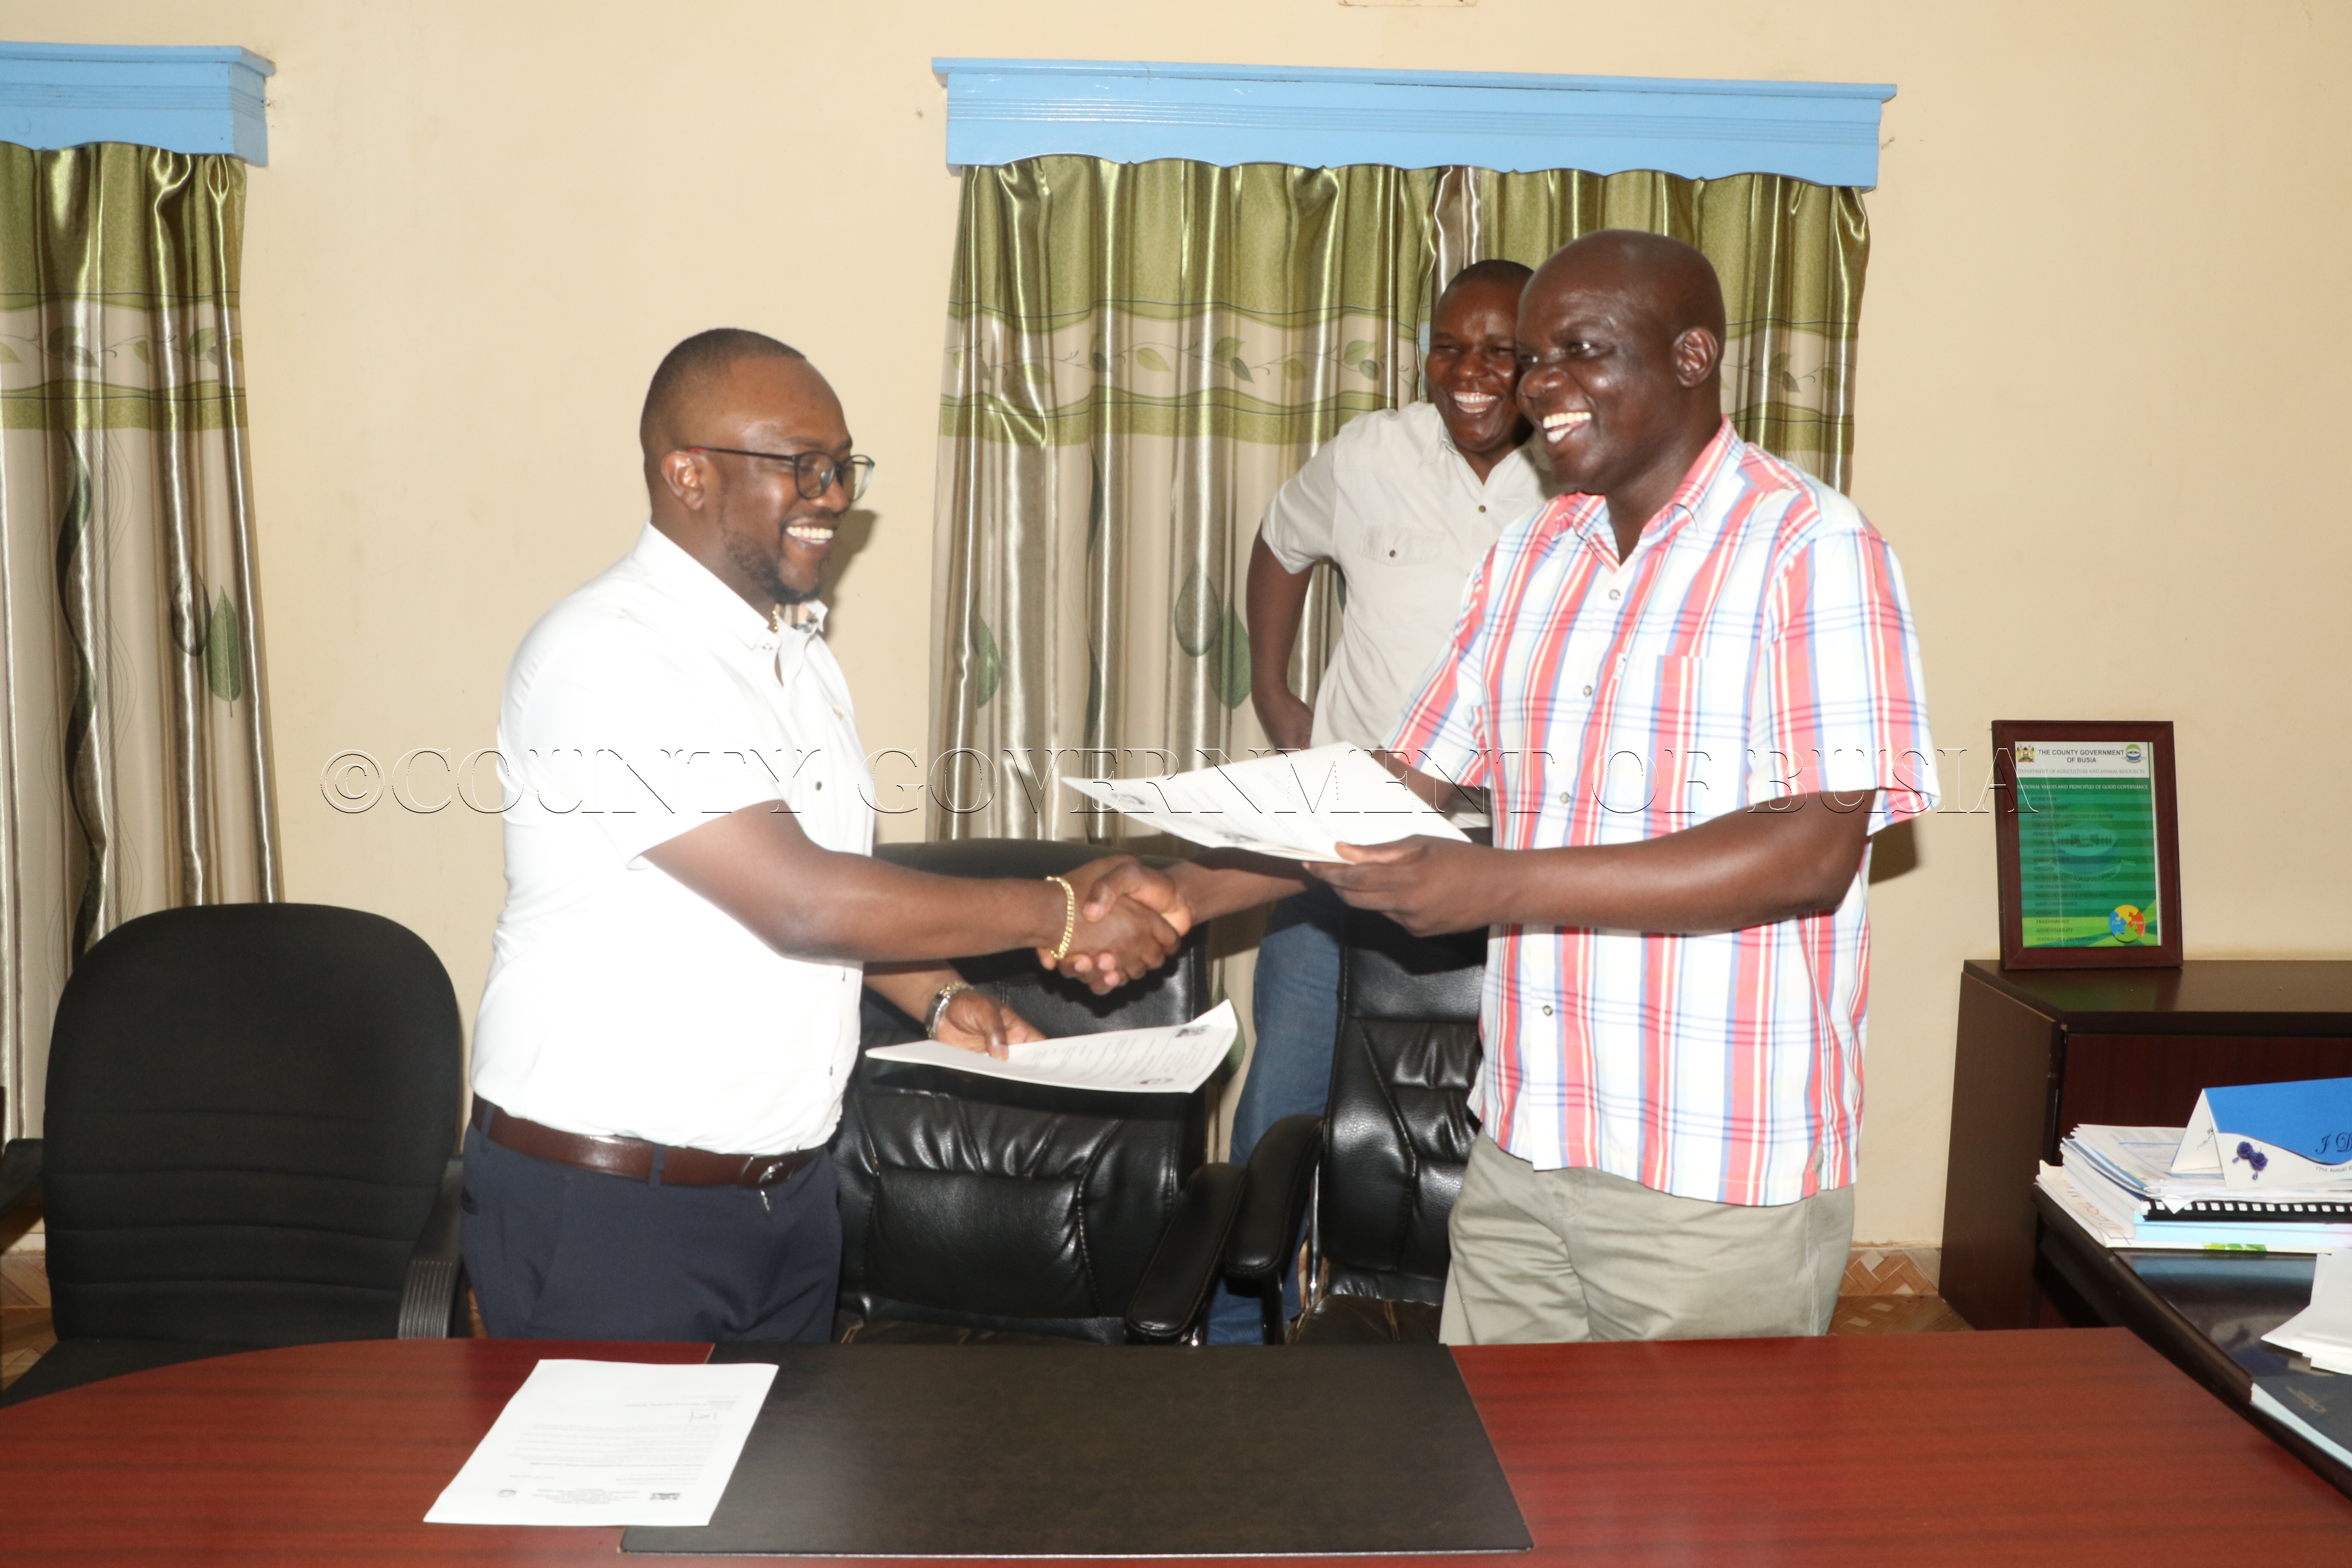 Cross Border Agreements Busia Gvt Contractor Sign Agreement For Contruction Of Cross Border